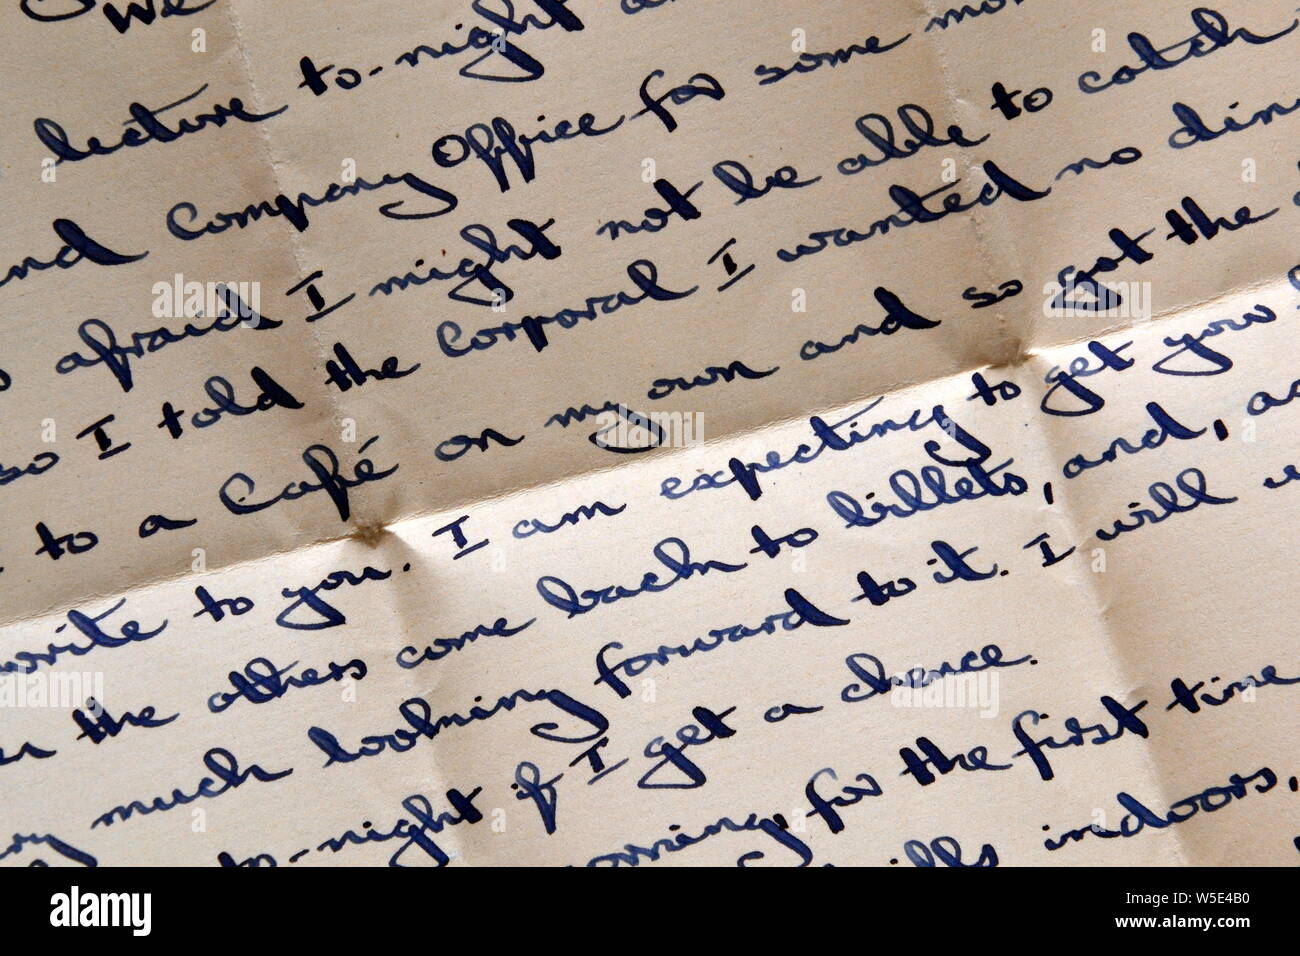 A Close Up Of A 1940 S Love Letter Written During World War 2 By A Husband Who Was A Soldier In The British Army To His Wife Stock Photo Alamy